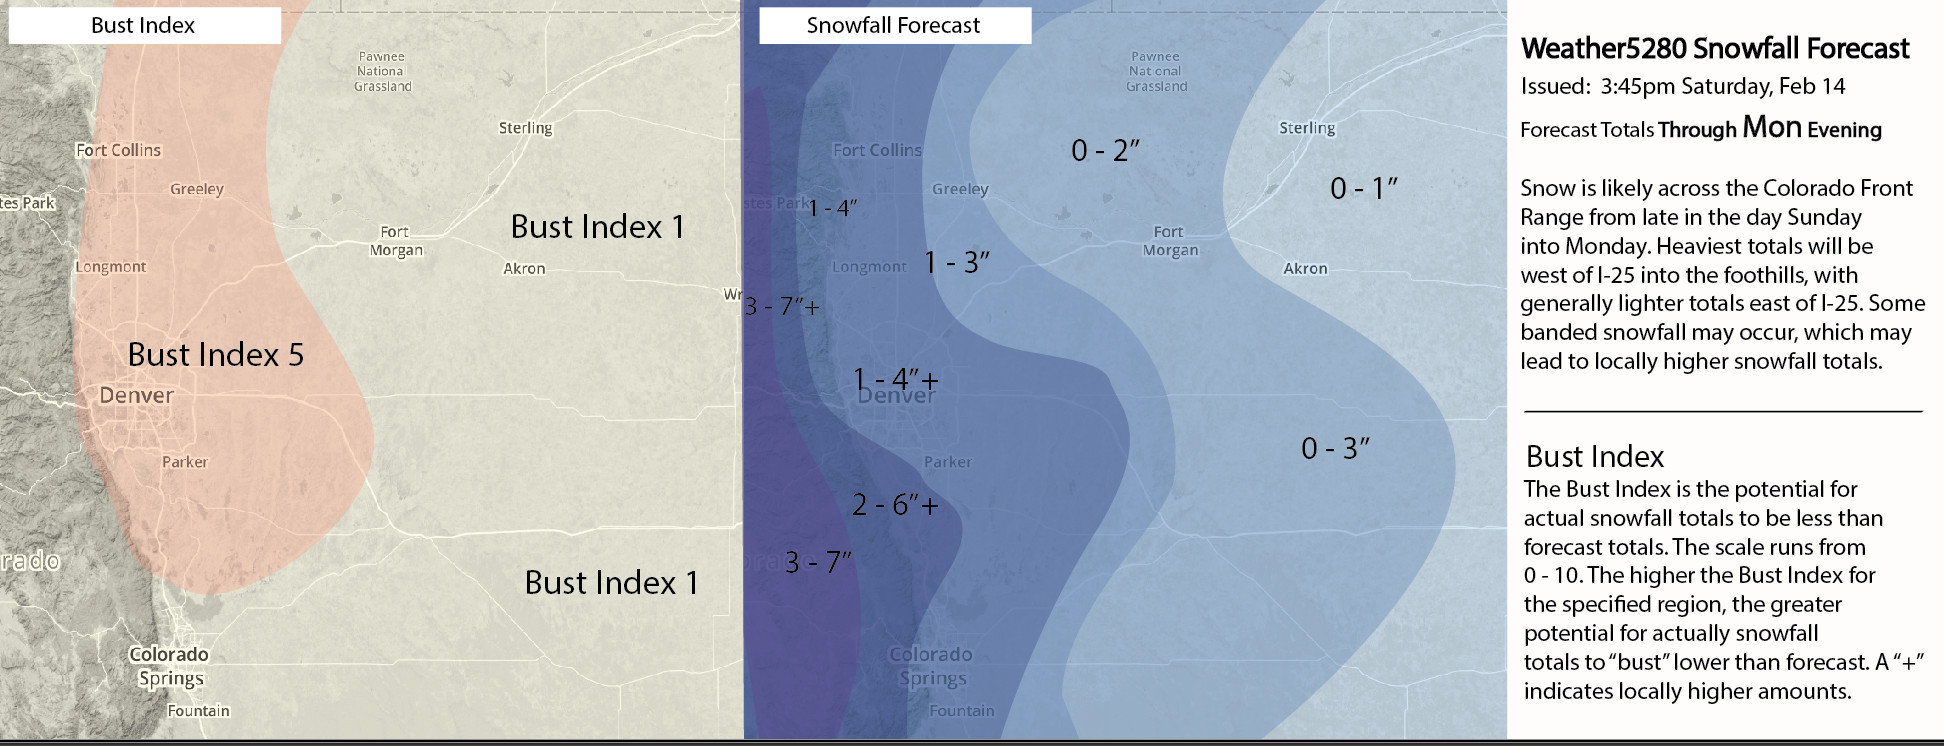 Snowfall forecast issued 4pm Sat, Feb 14. Possible adjustments to be made Saturday night into early Sunday.